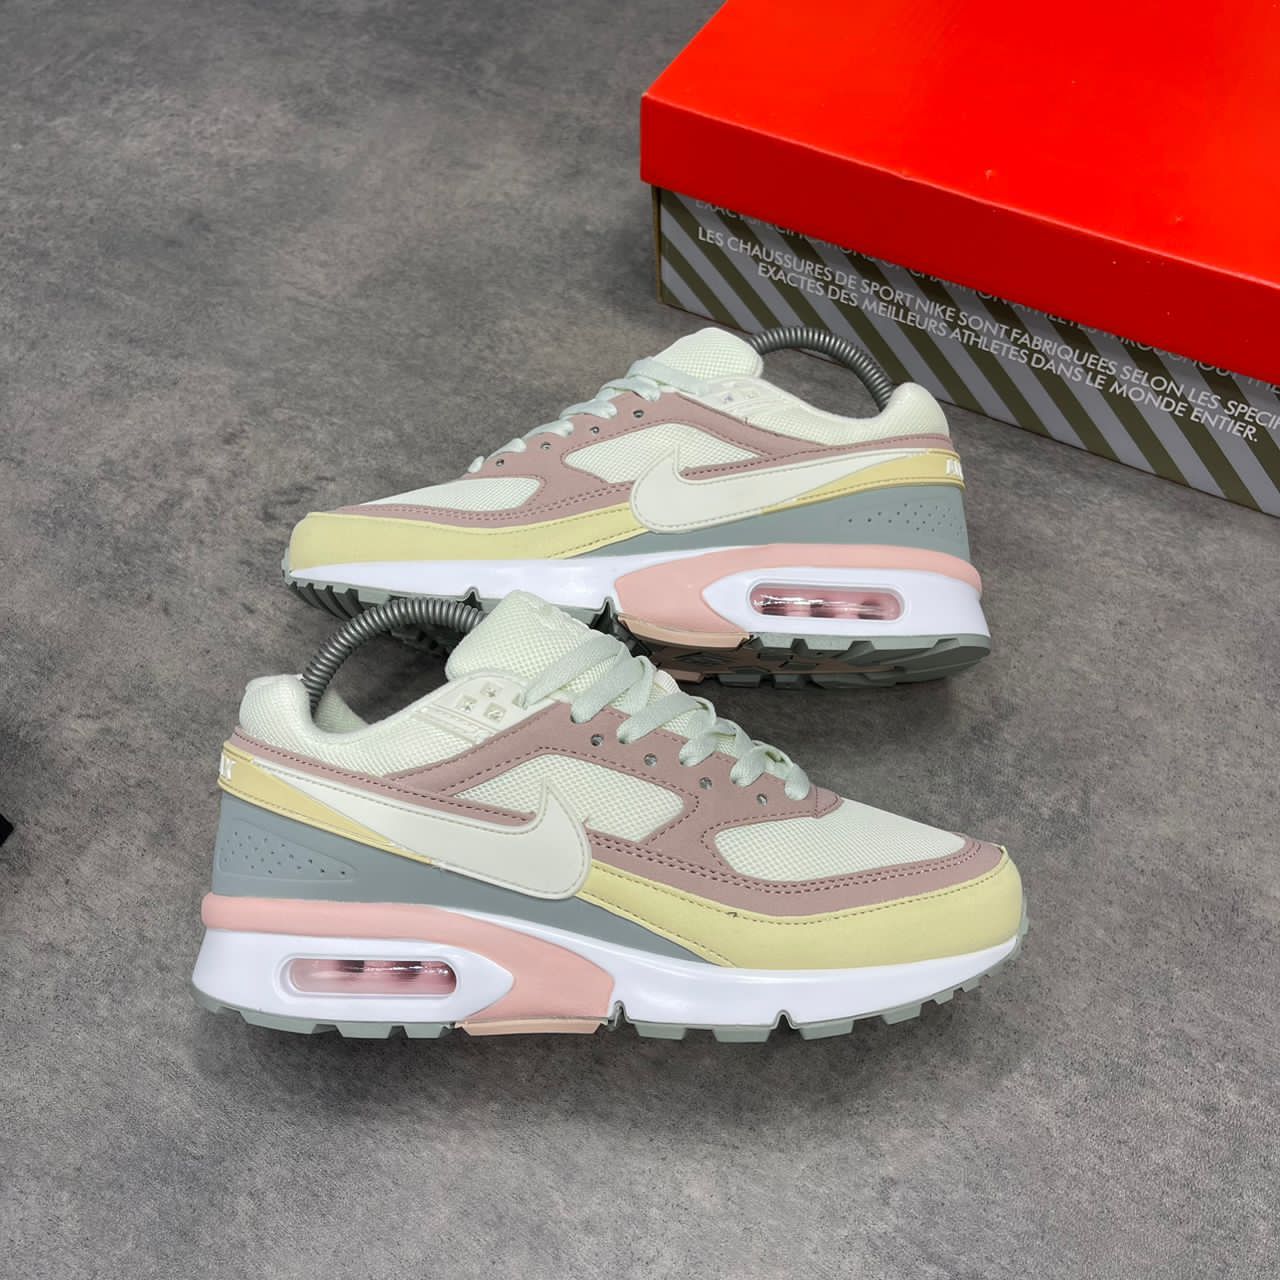 Conflict kampioen commentator VT of dé Arc on Twitter: "*Nike Air Max BW “Light Stone Coconut Milk Jade  Sneaker*👠 *Now Available in store* ‼️ *Sizes: 37 - 40* *Price: ₦35,000💰*  https://t.co/qsRYVqeV3d" / Twitter